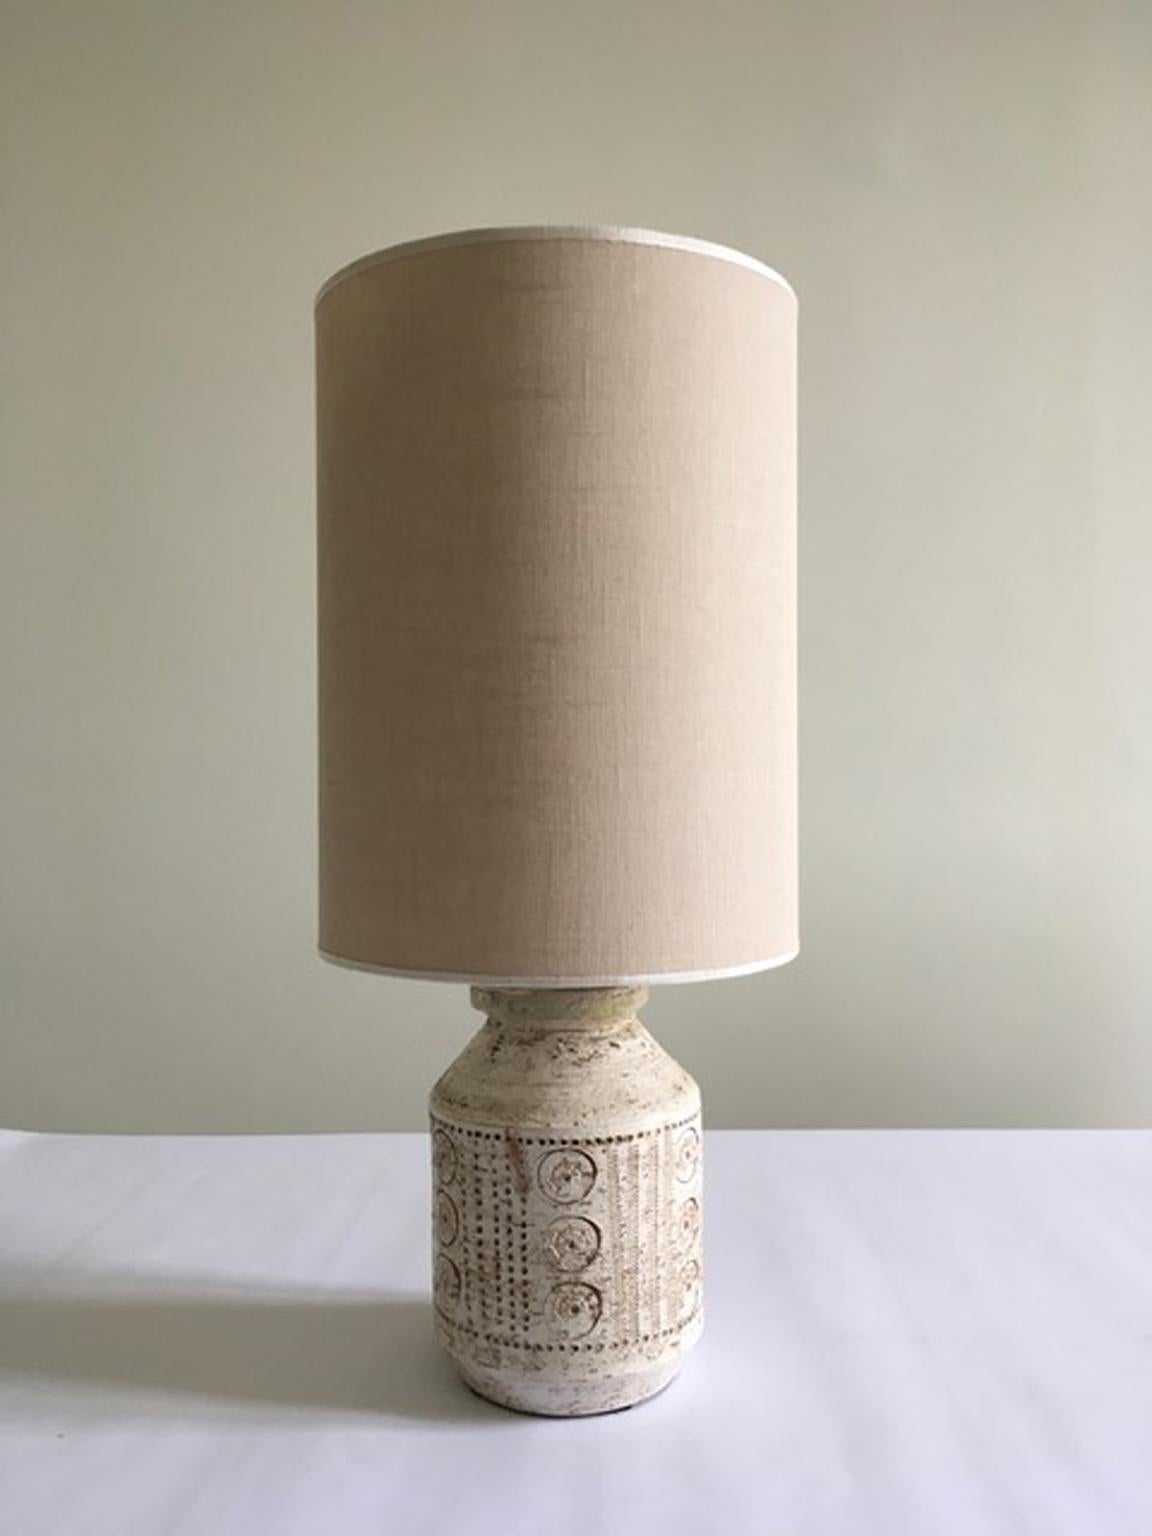 This is a stunning Italian ceramic table lamp made in 1960/1969 circa.
The white ceramic body has an organic shape and it is engraved on the surface with  abstract drawing that can be defined as tribal graffiti. This is a table lamp trendy and